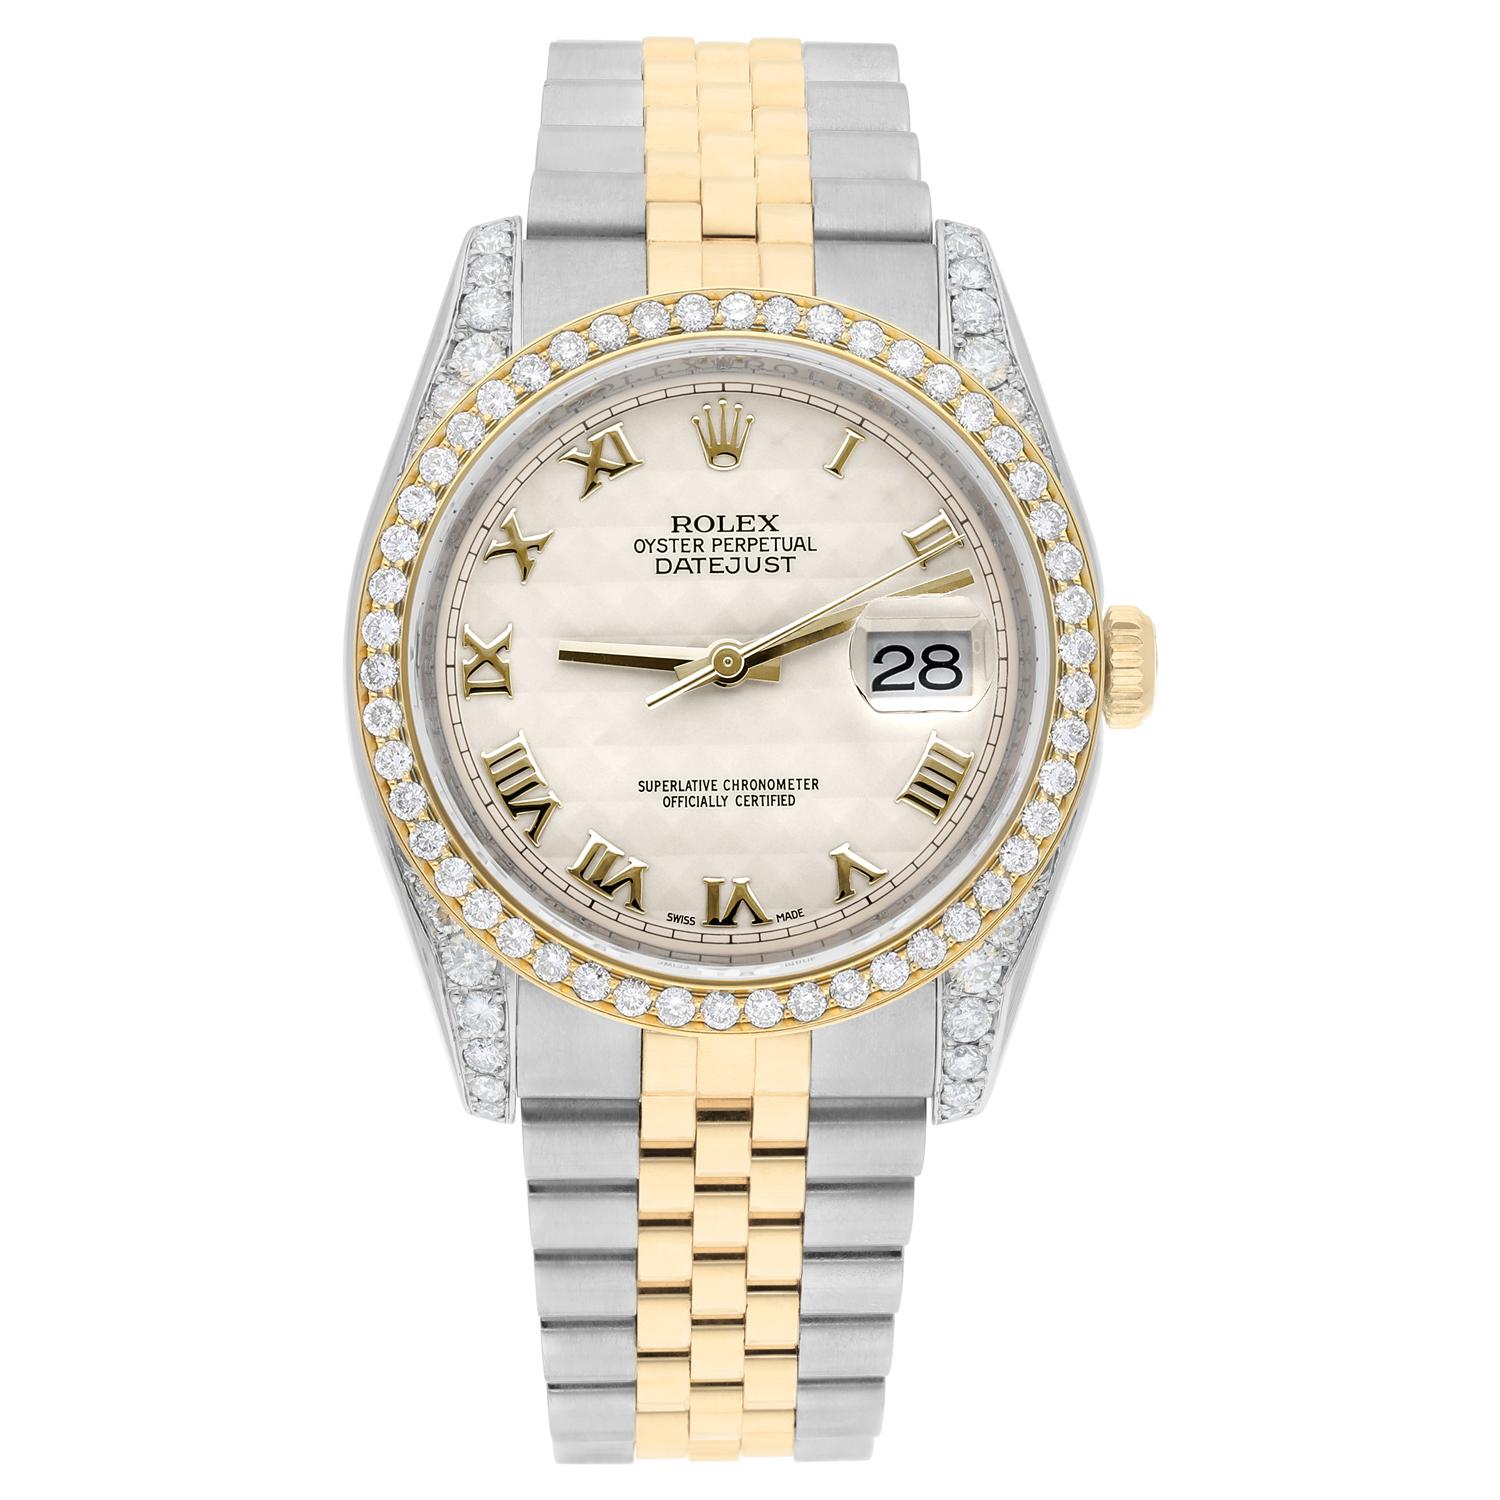 This watch has been professionally polished, serviced and is in excellent overall condition. There are absolutely no visible scratches or blemishes. Authenticity guaranteed! Diamond bezel 18K gold plated, lugs custom diamond set. Diamonds are 100%